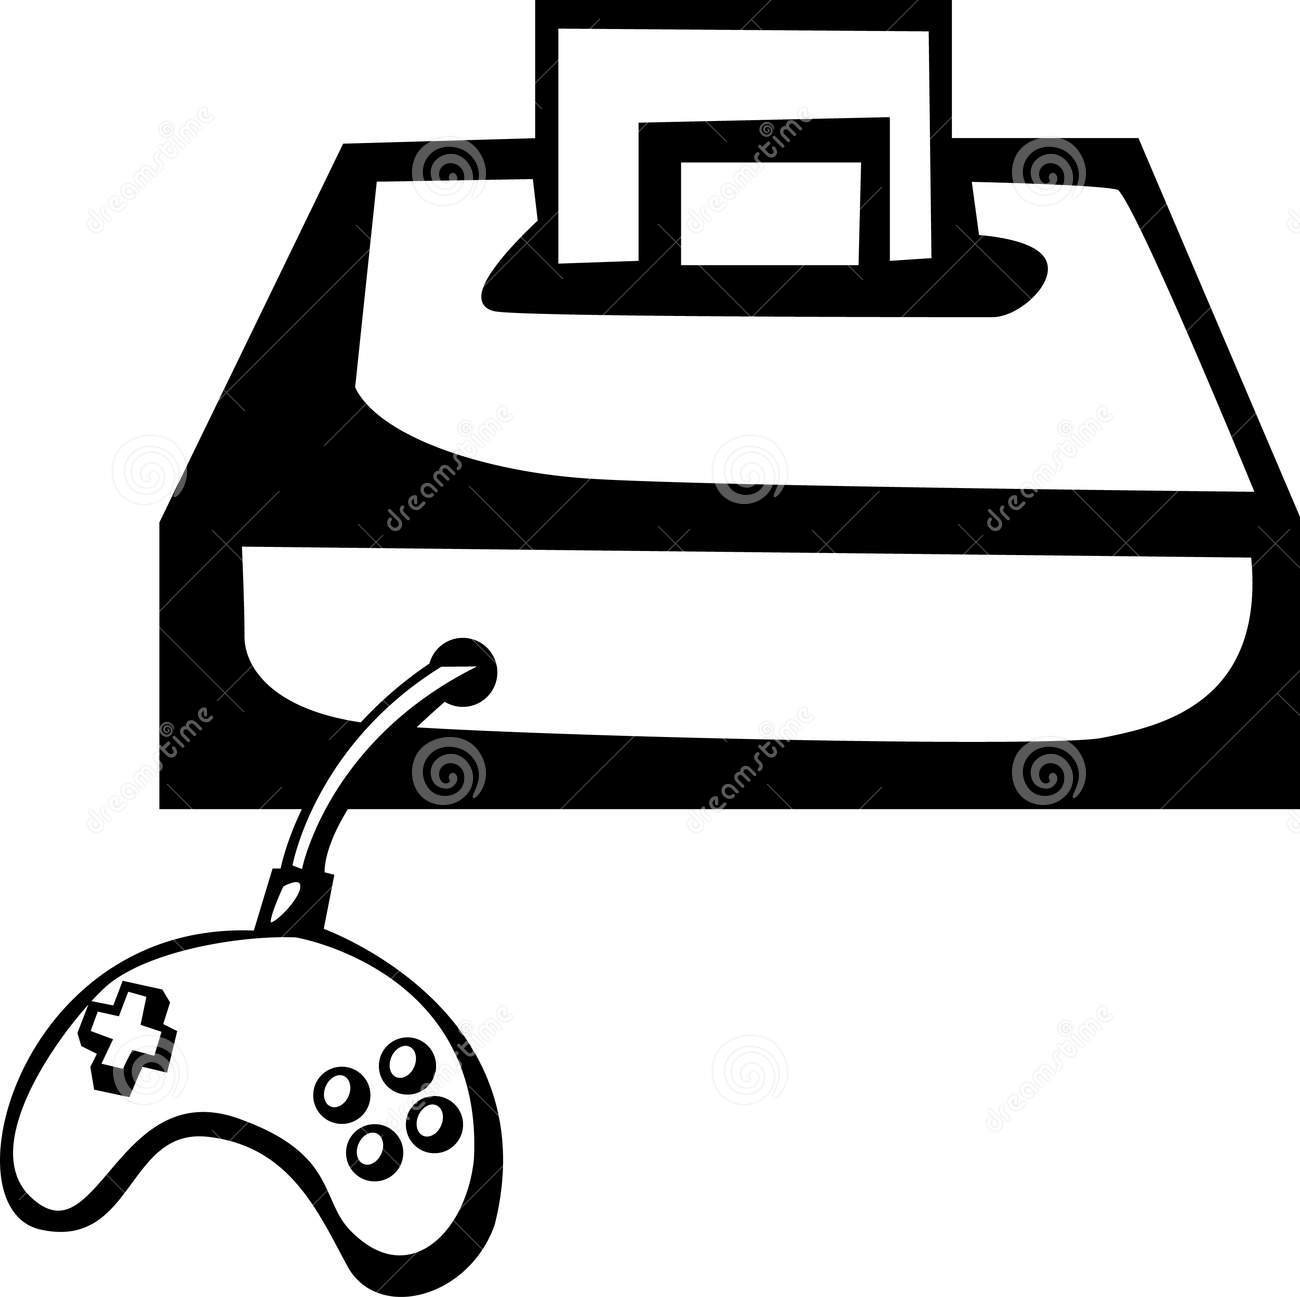 Games clipart black and white